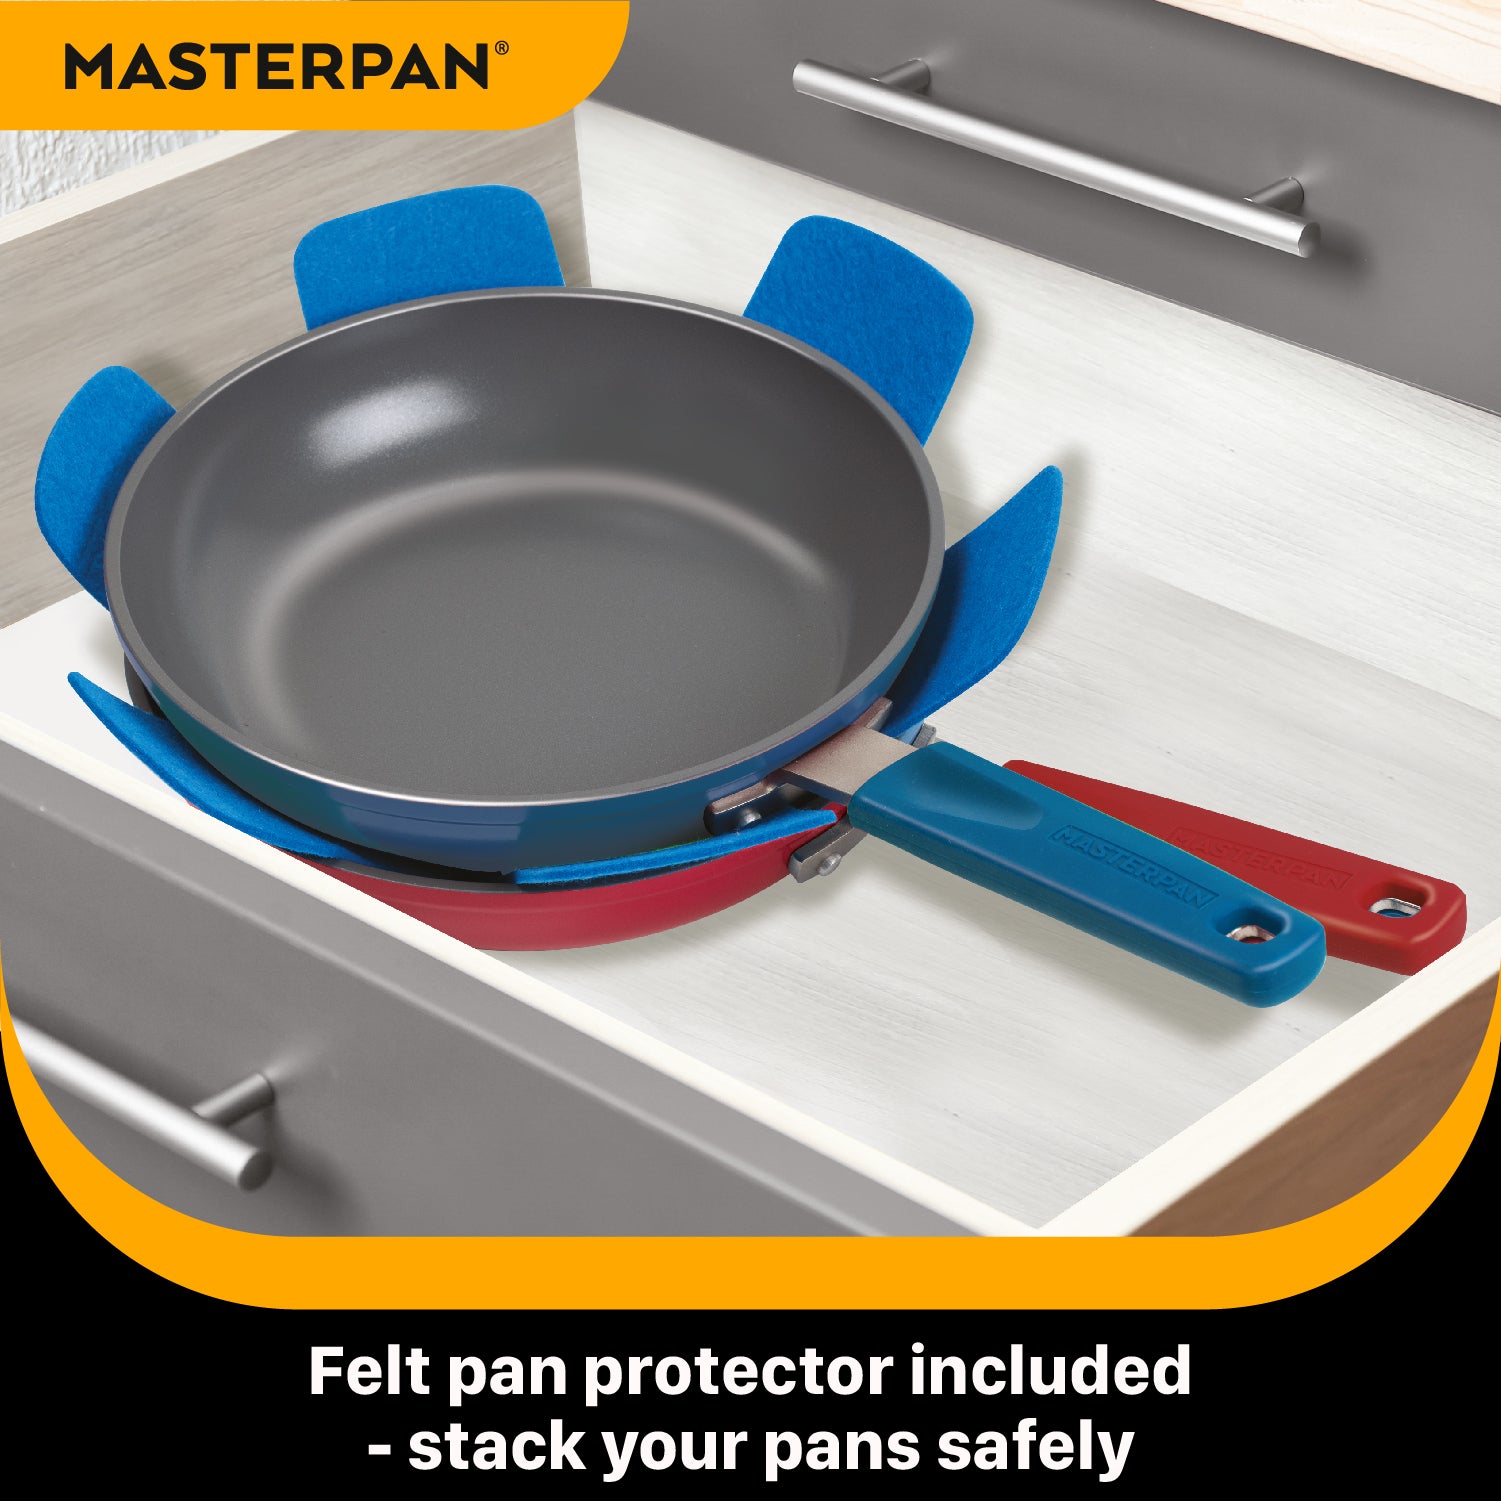 STOVETOP OVEN FRY PAN & SKILLET WITH HEAT-IN STEAM-OUT LID, HEALTHY CERAMIC NON-STICK ALUMINIUM WITH STAINLESS STEEL CHEF’S HANDLE, BONUS 2 UTENSILS AND FELT PAN PROTECTOR INCLUDED, 9.5” (24cm) - AZURE (7569C)